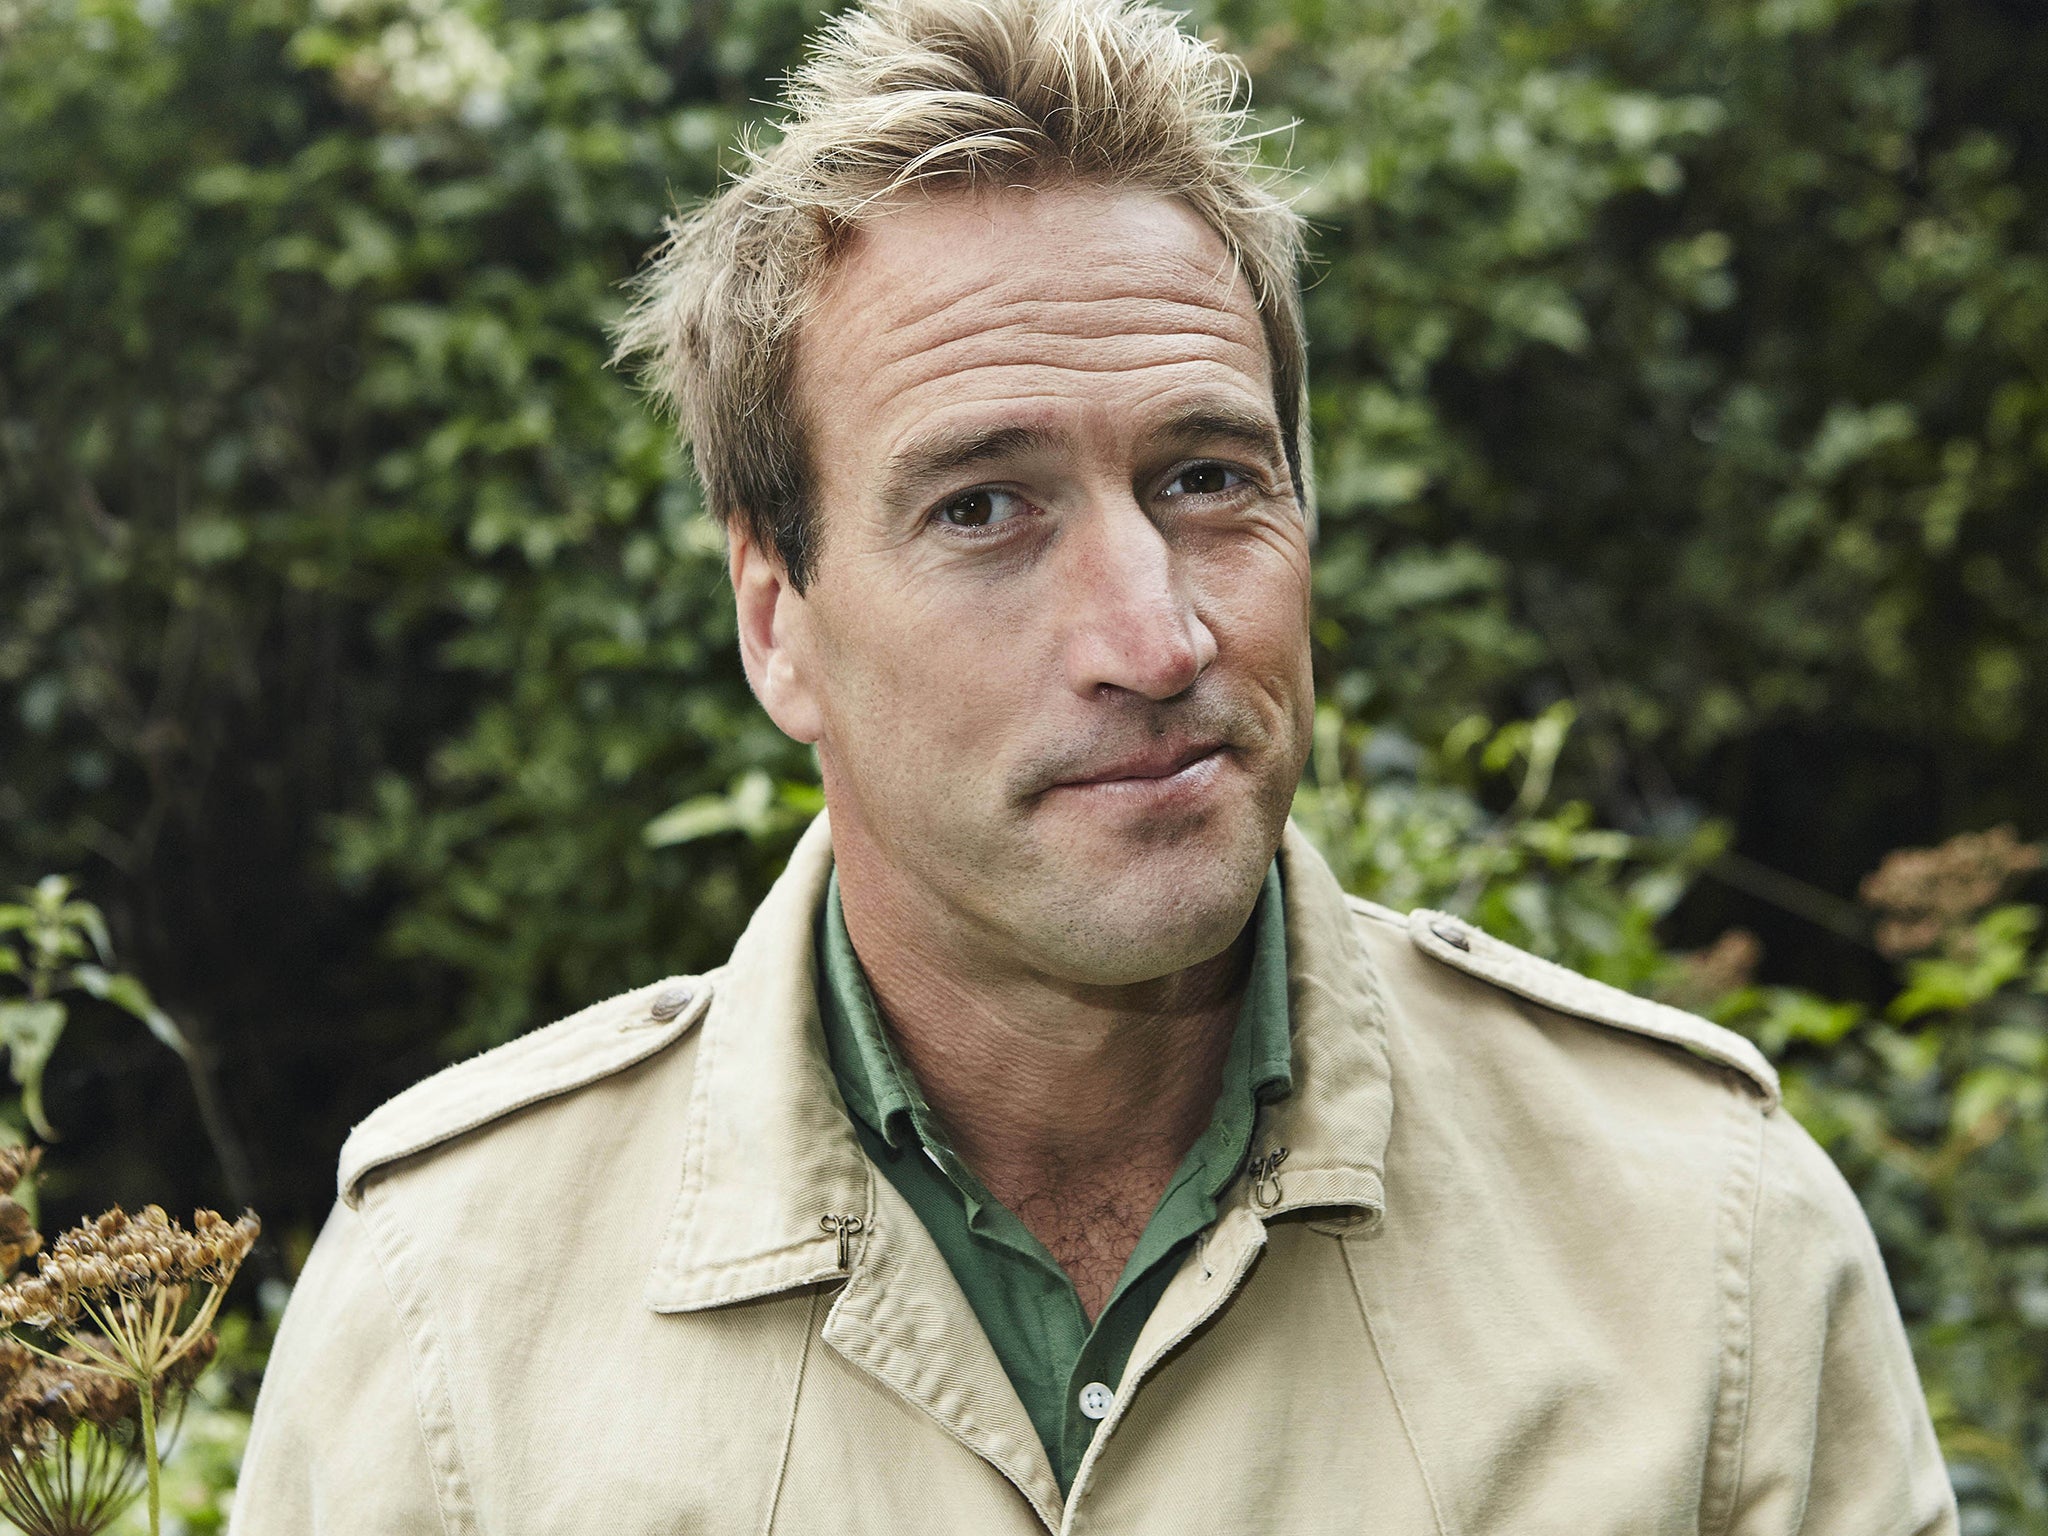 Ben Fogle, the presenter of Countrywise